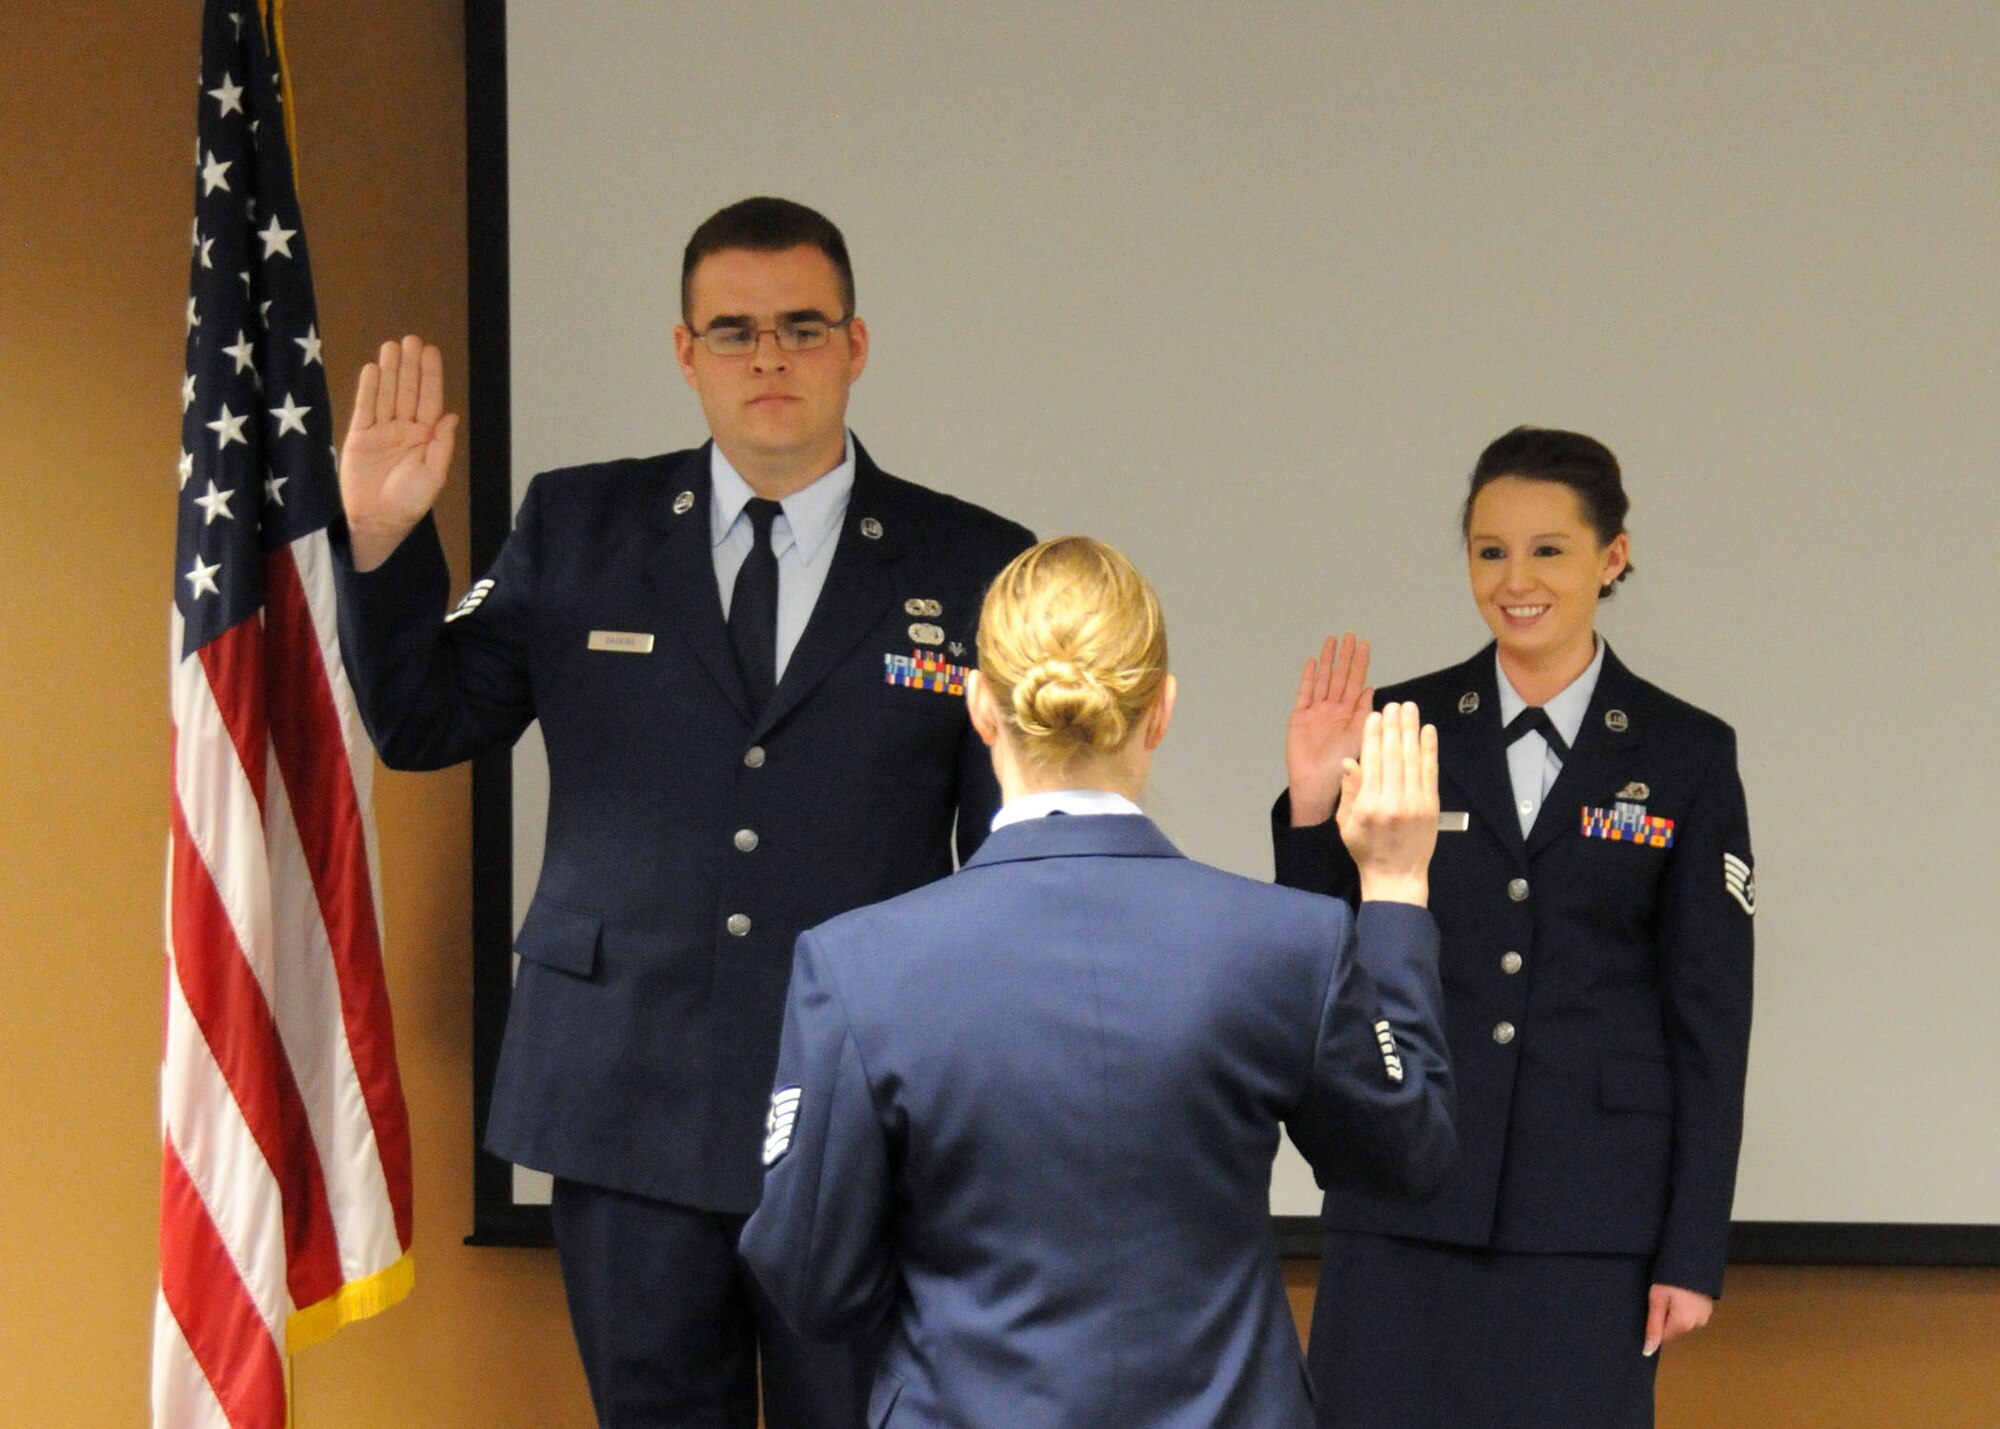 Tech. Sgt. Tammy Wajer, 120th Maintenance Operations Squadron member, leads Staff Sgt. Jack Gaskins, 120th Logistics Readiness Squadron member, and Staff Sgt. Paige Held, 120th Force Support Squadron member, in the recitation of their oath during the NCO Induction Ceremony held at the 120th Fighter Wing on April 7. (U.S. Air Force Photo/Senior Master Sgt. Eric Peterson)